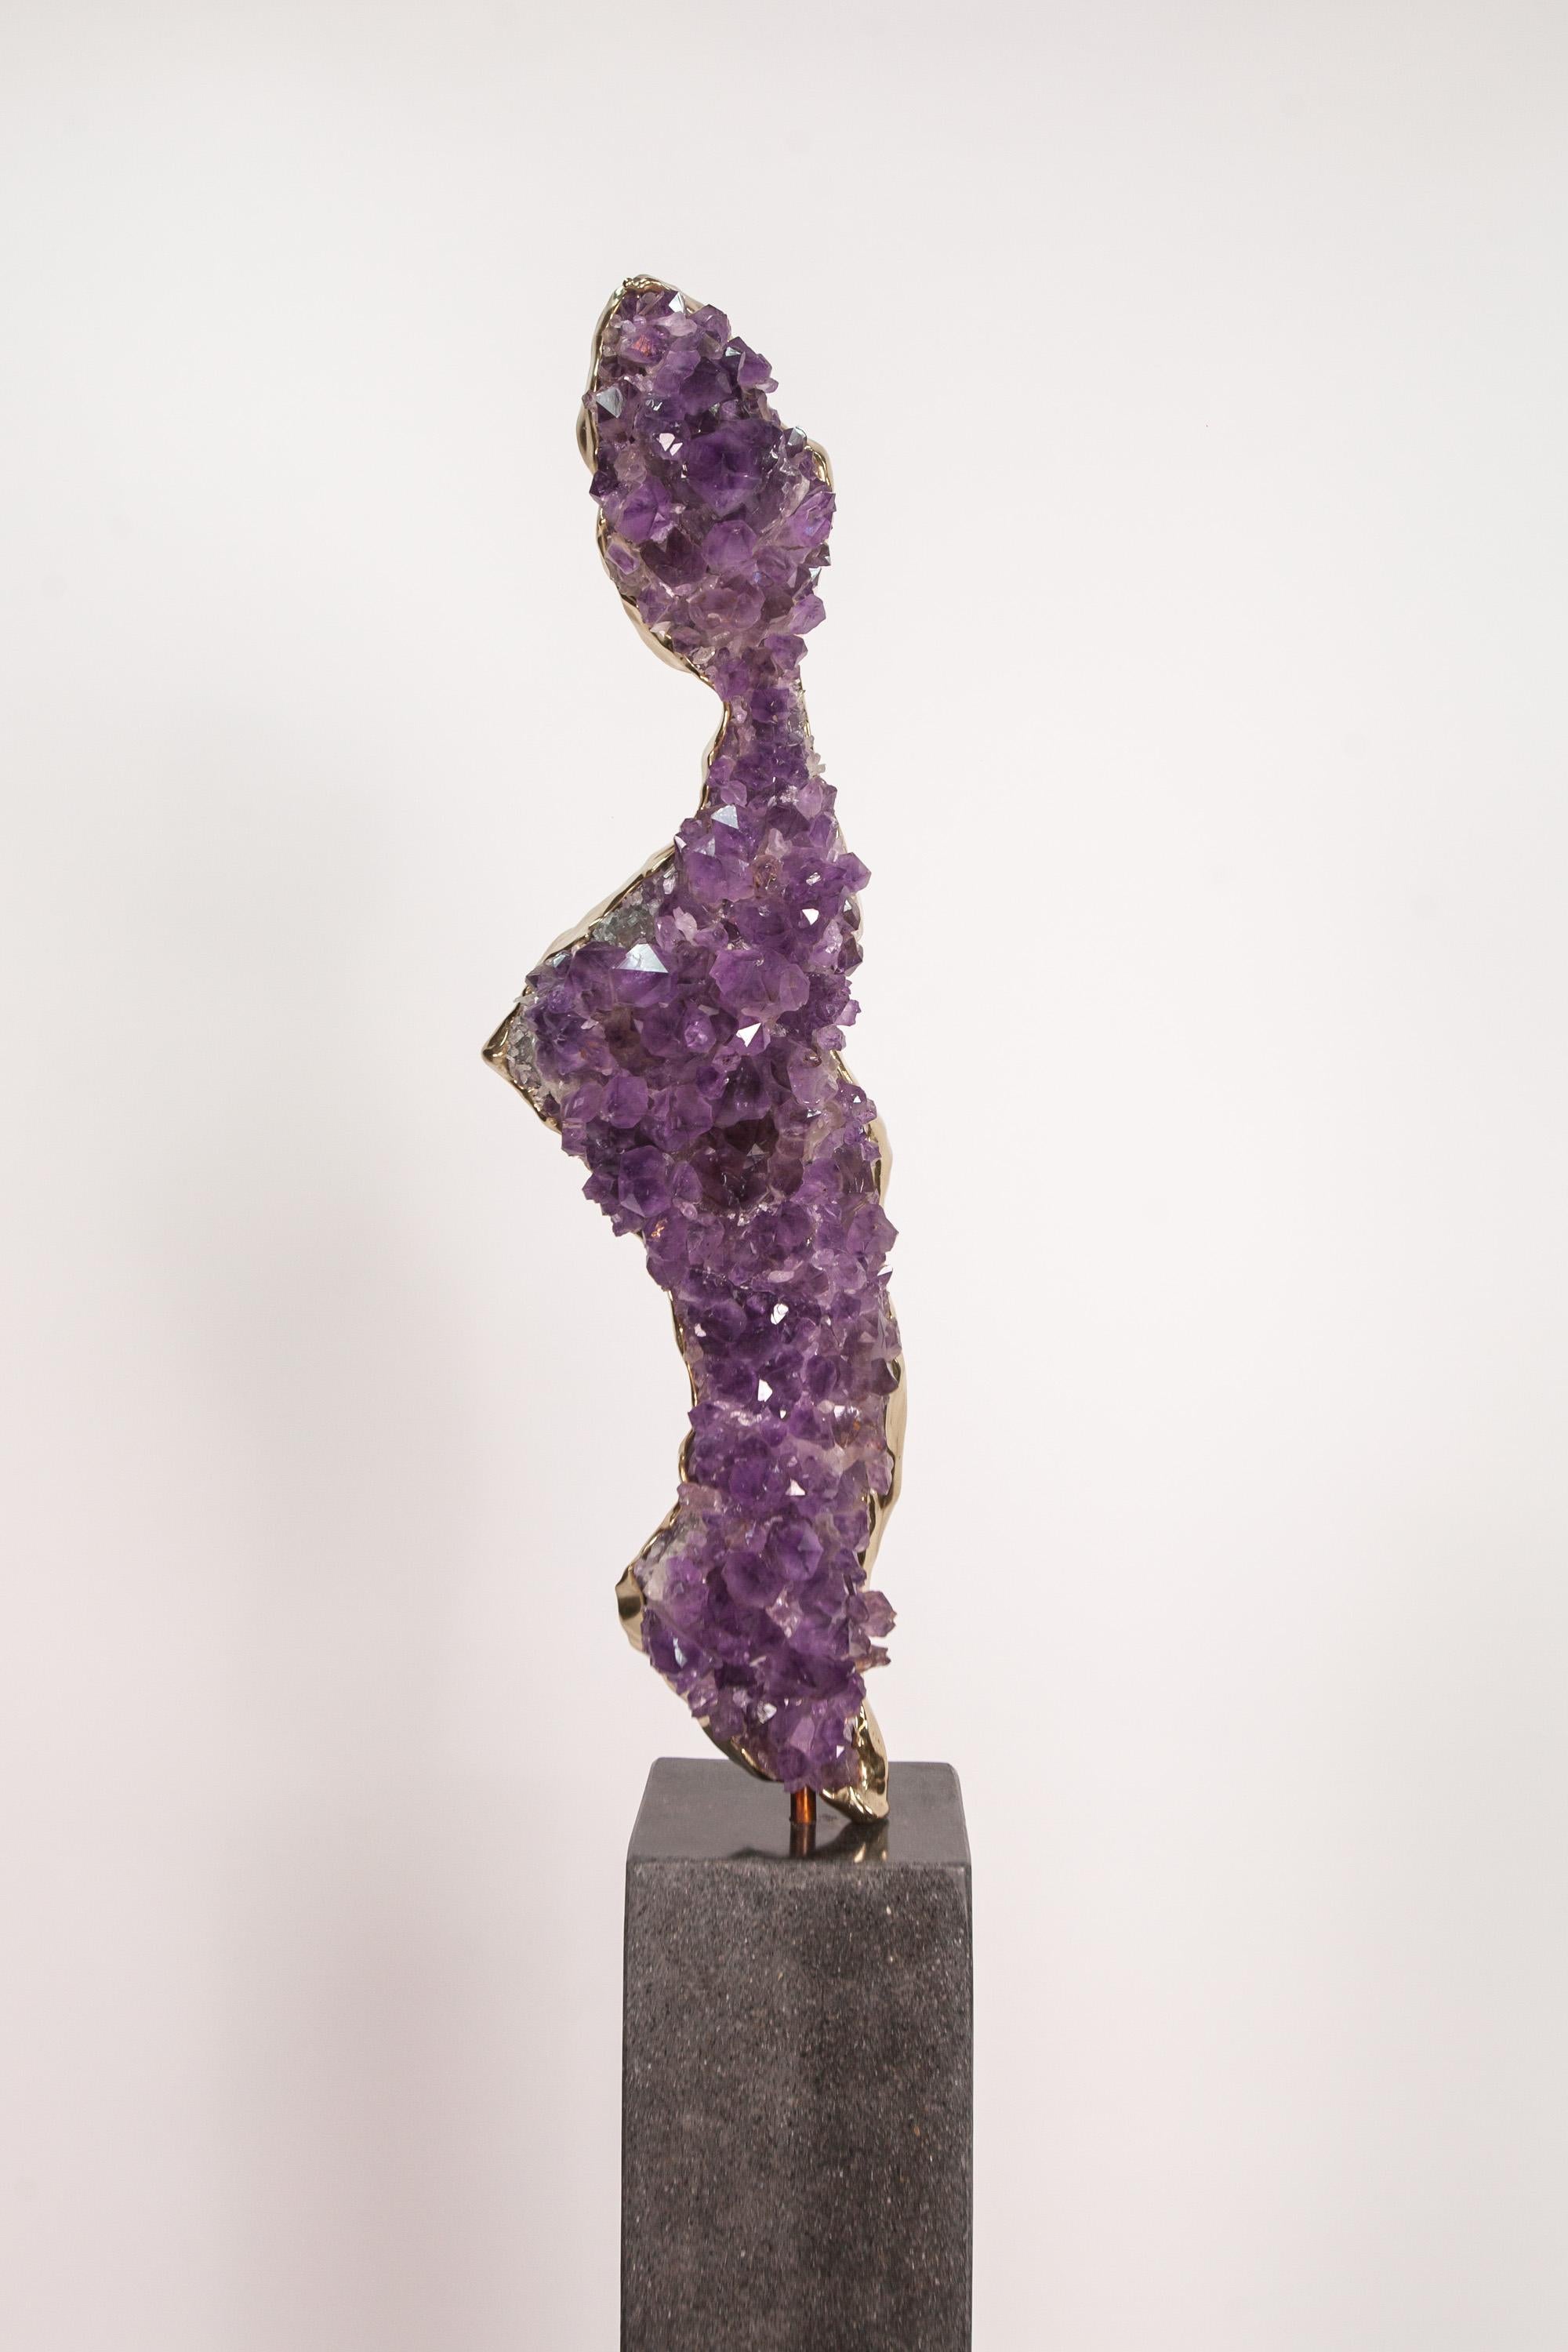 LIMINAL STATE  Amethyst crystals, bronze sculpture For Sale 3